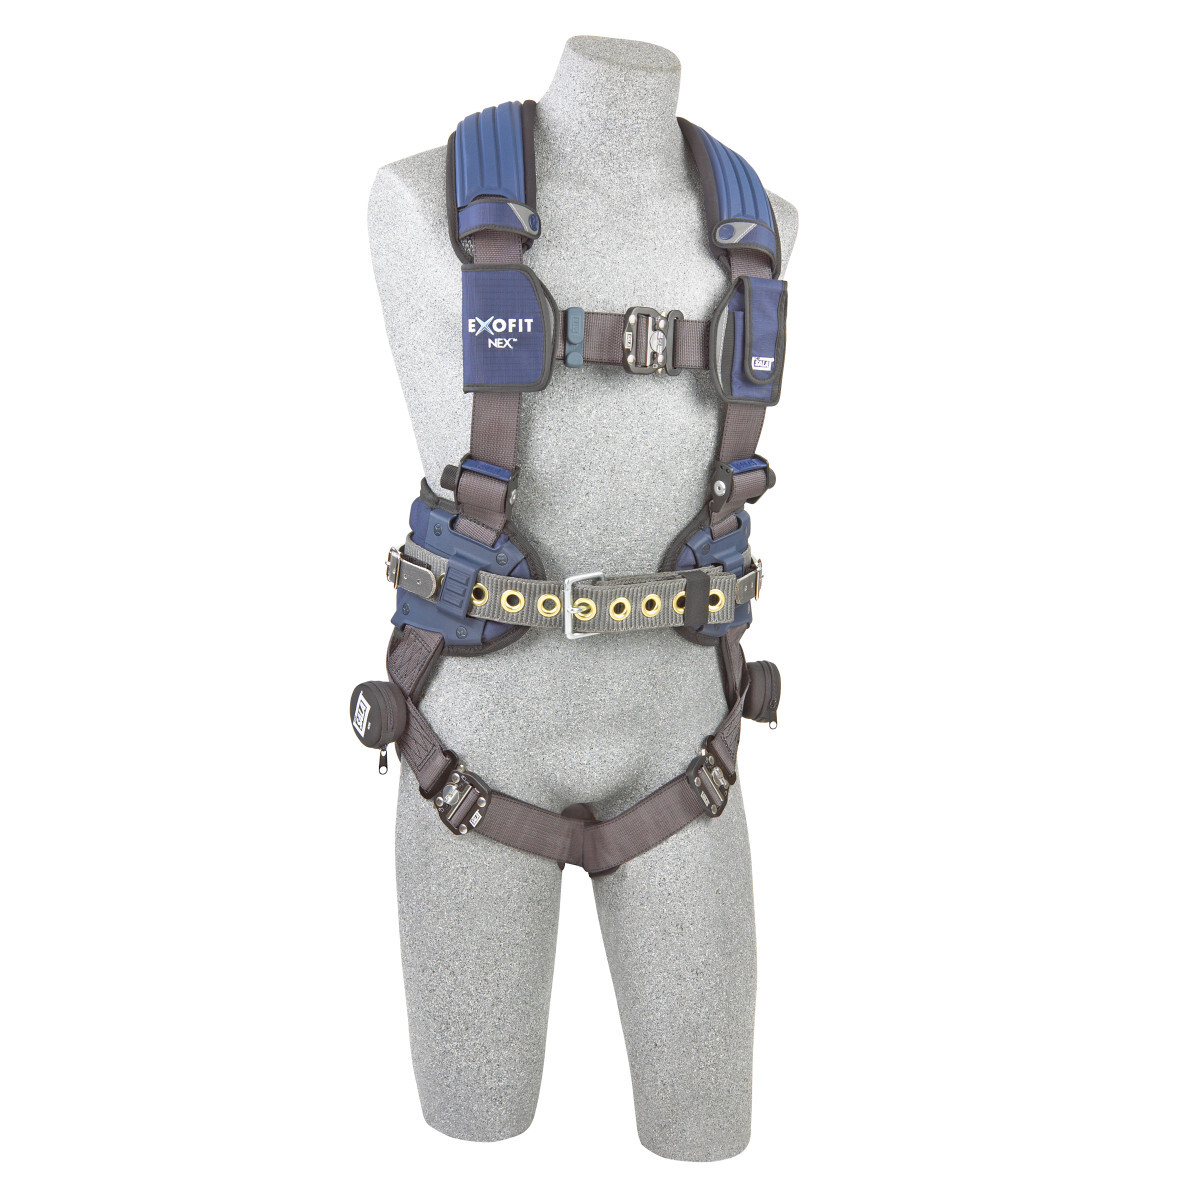 3M™ DBI-SALA® X-Large ExoFit NEX™ Full Body/Vest Style Harness With Tech-Lite™ Aluminum Back D-Ring, Miner'S Belt With Pad And S